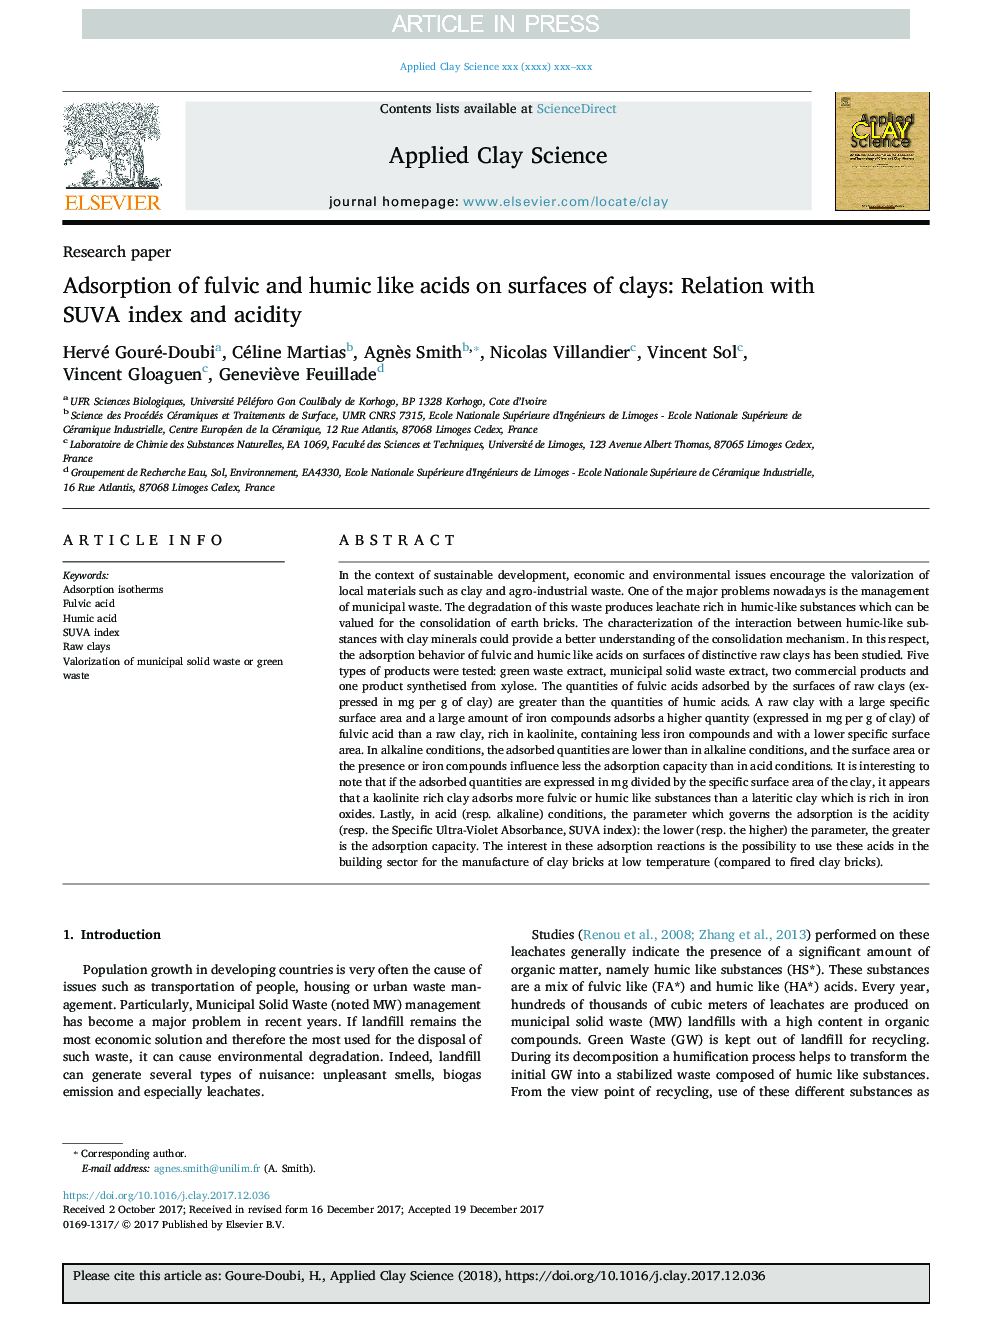 Adsorption of fulvic and humic like acids on surfaces of clays: Relation with SUVA index and acidity